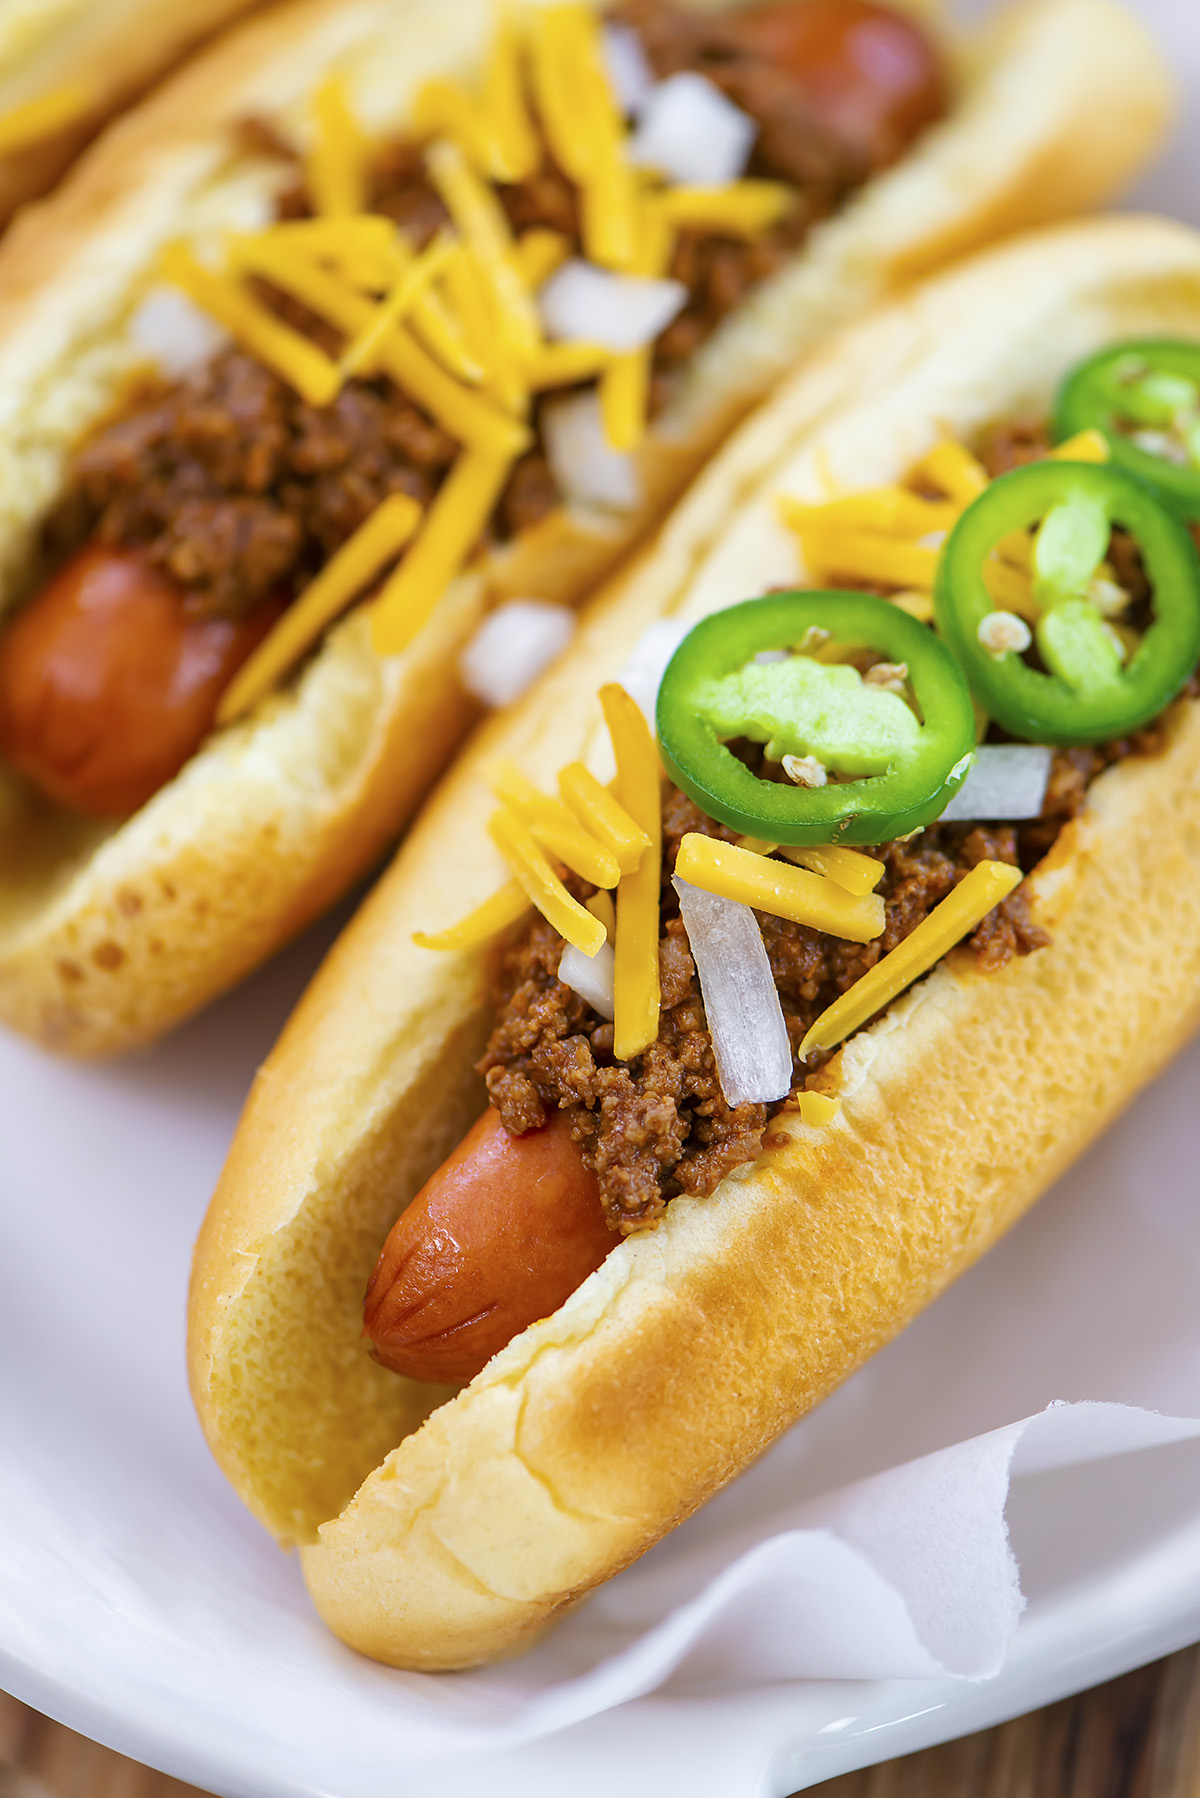 Close up of a chili dog with jalapenos on toop.